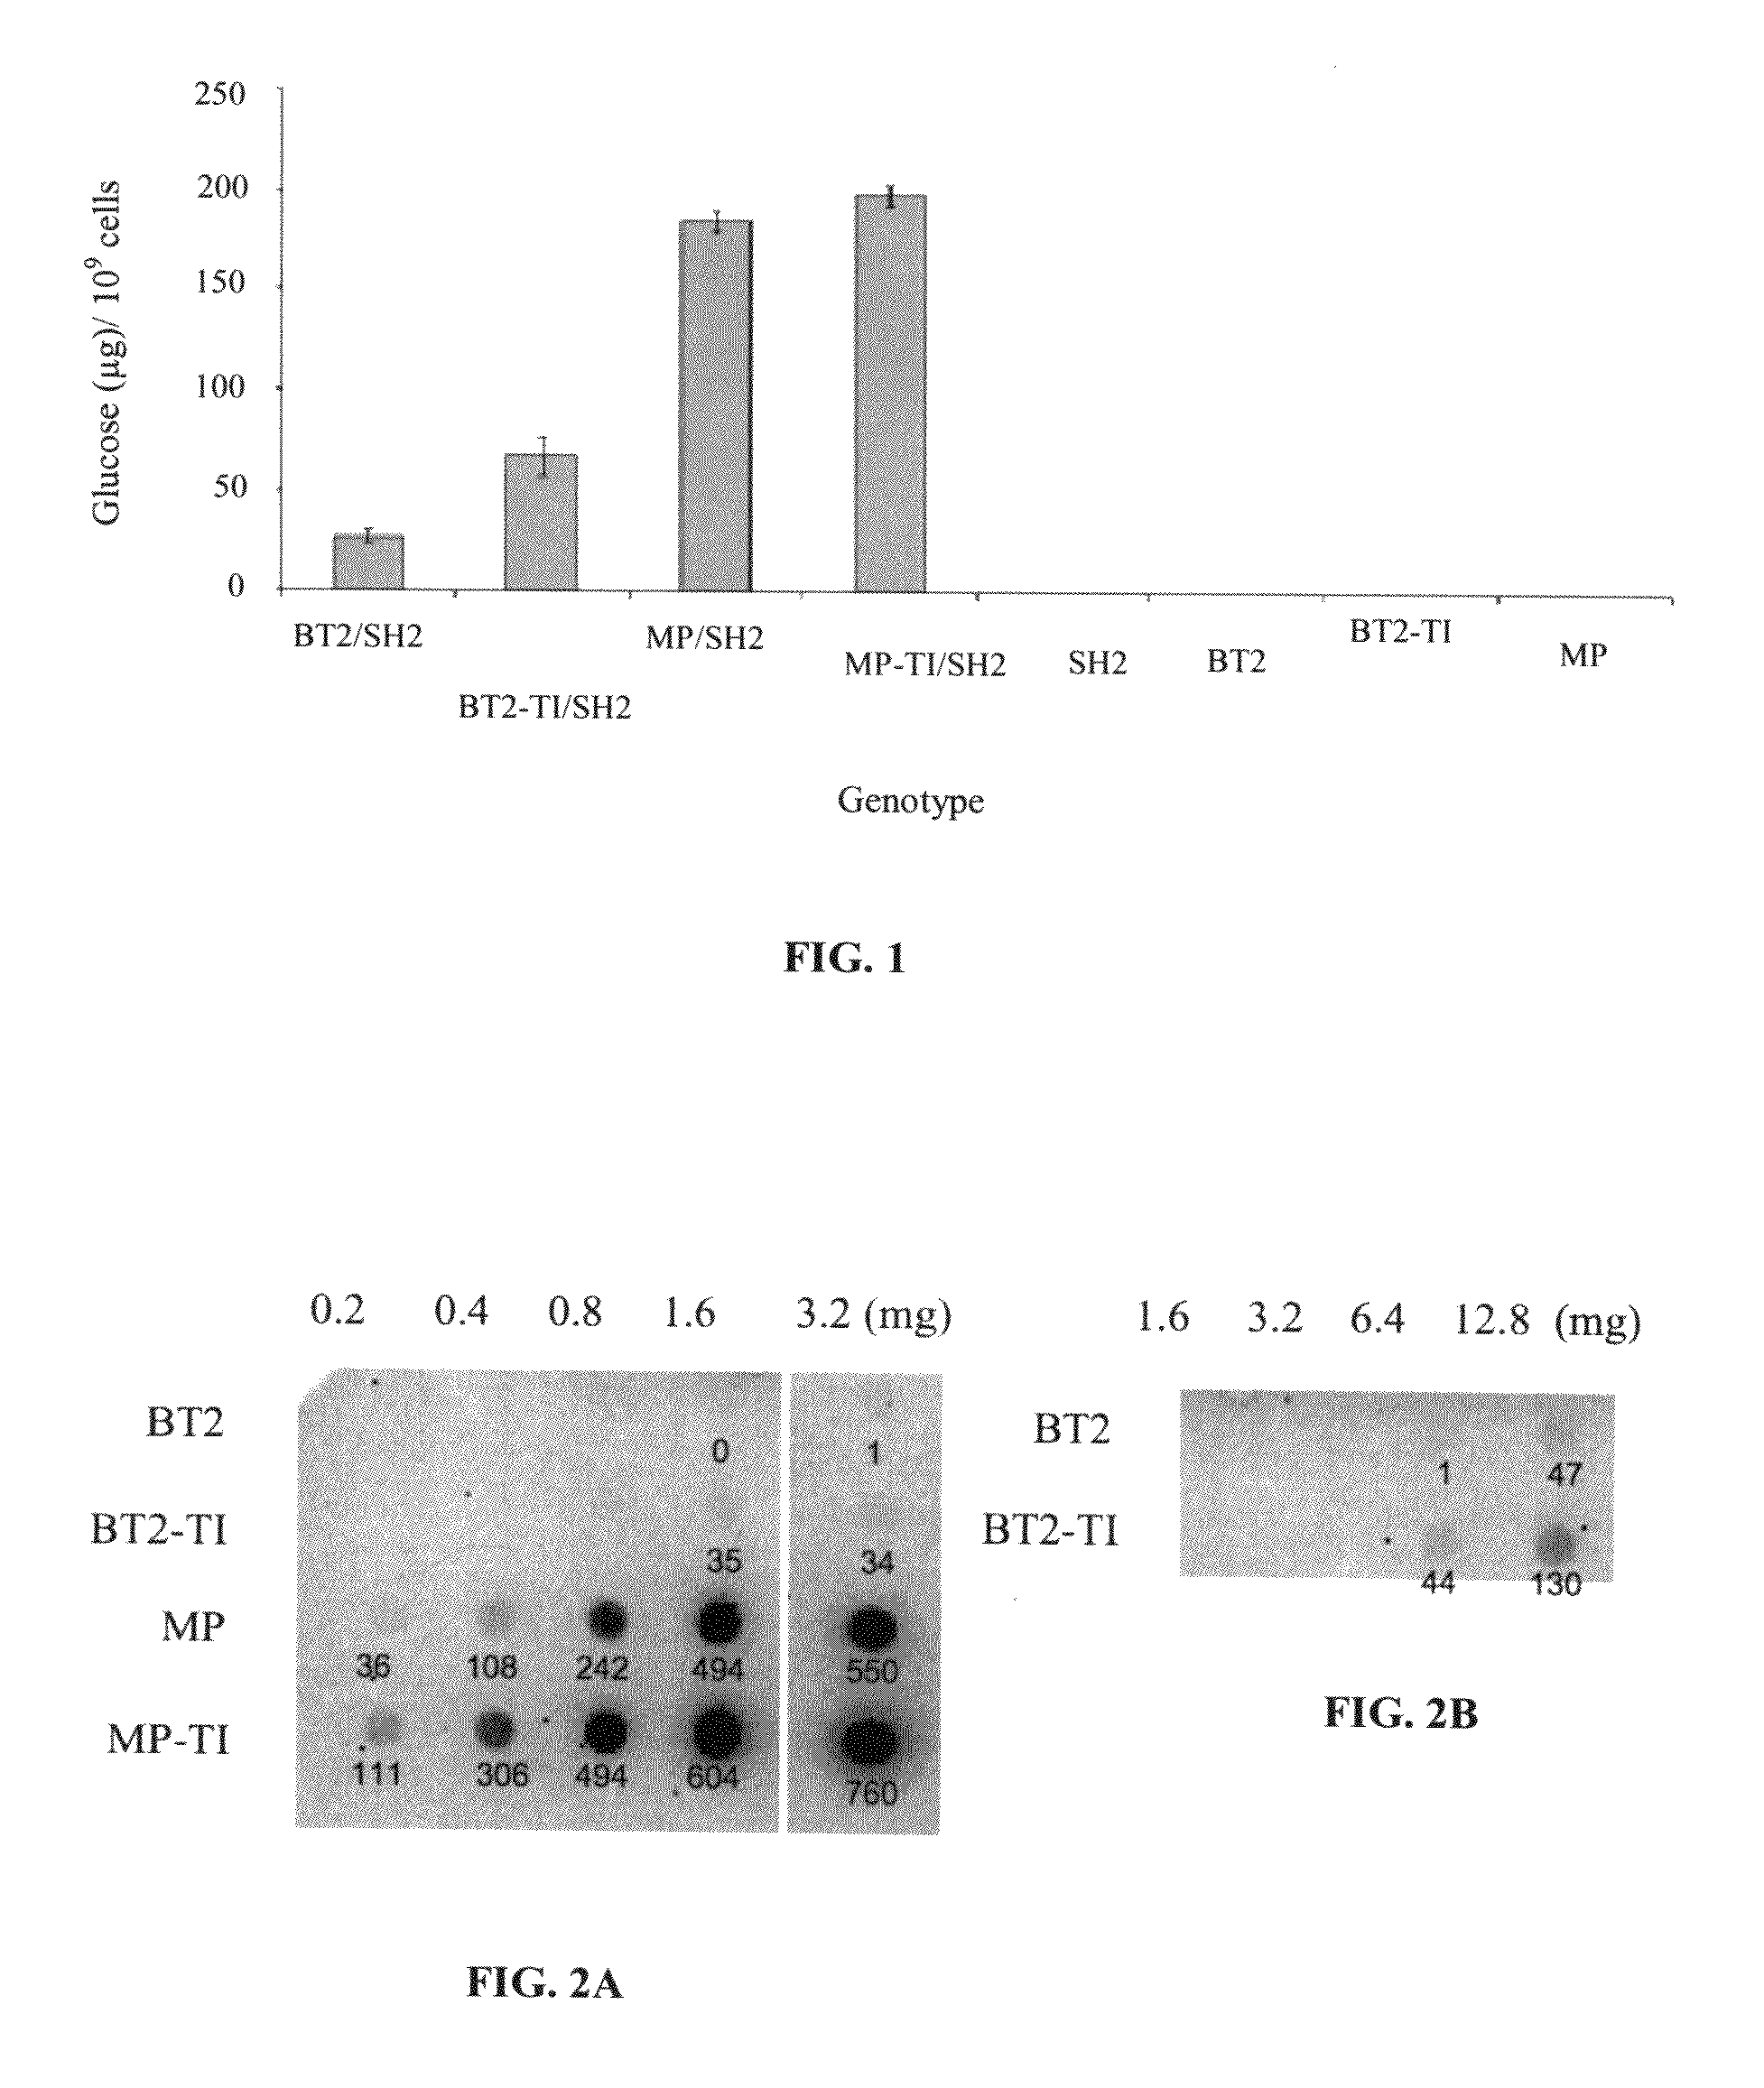 Heat resistant plants and plant tissues and methods and materials for making and using same